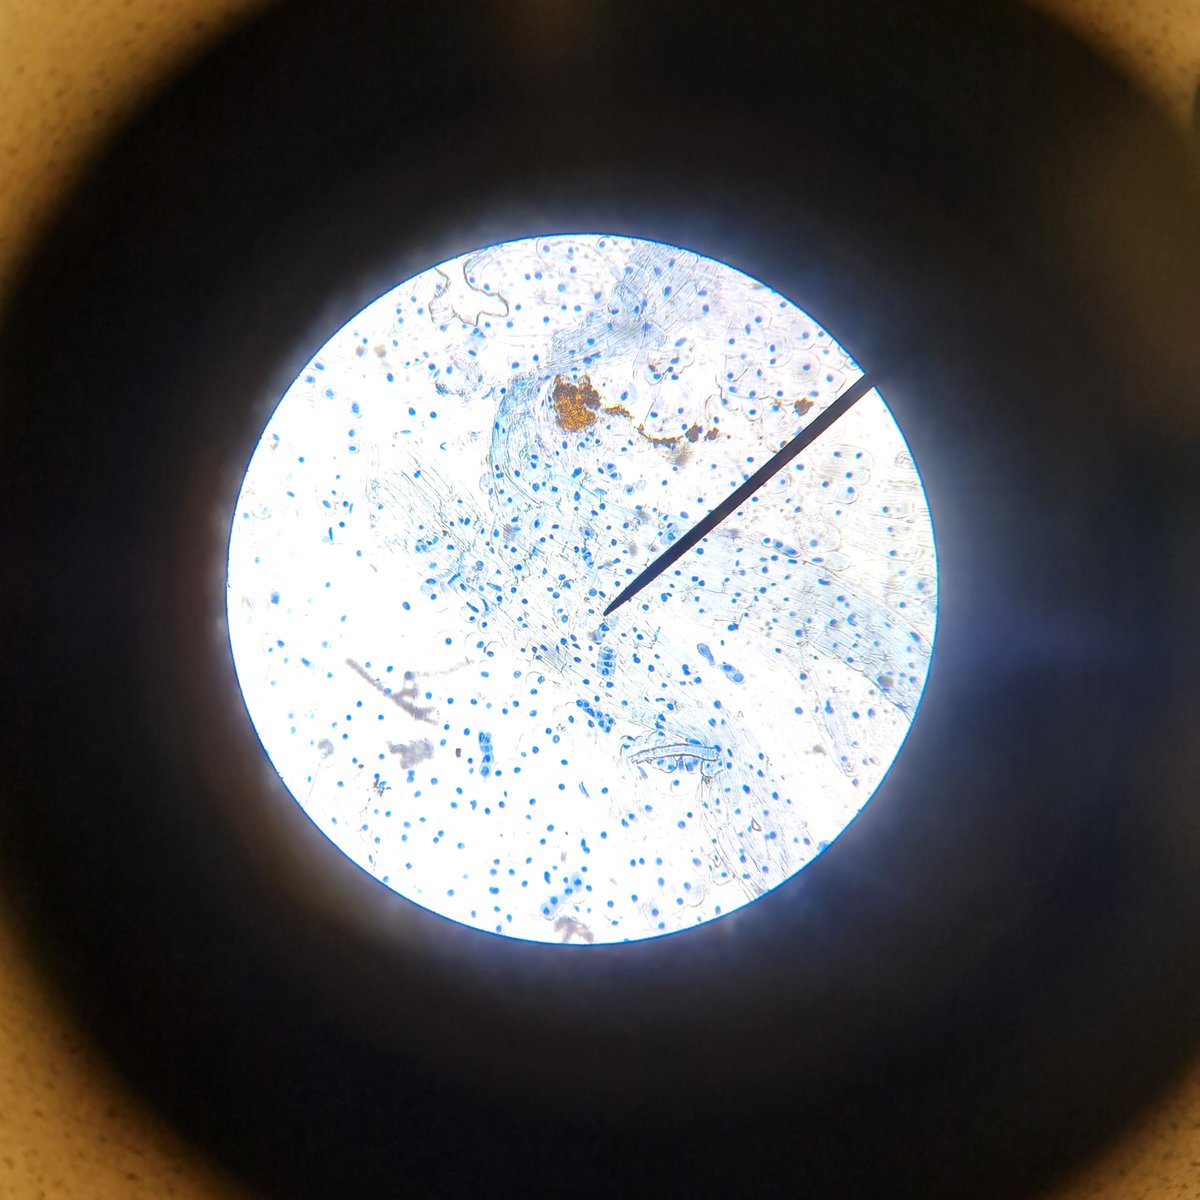 Garlic root tip cells prepared by year 12 students using Toluidine Blue stain.